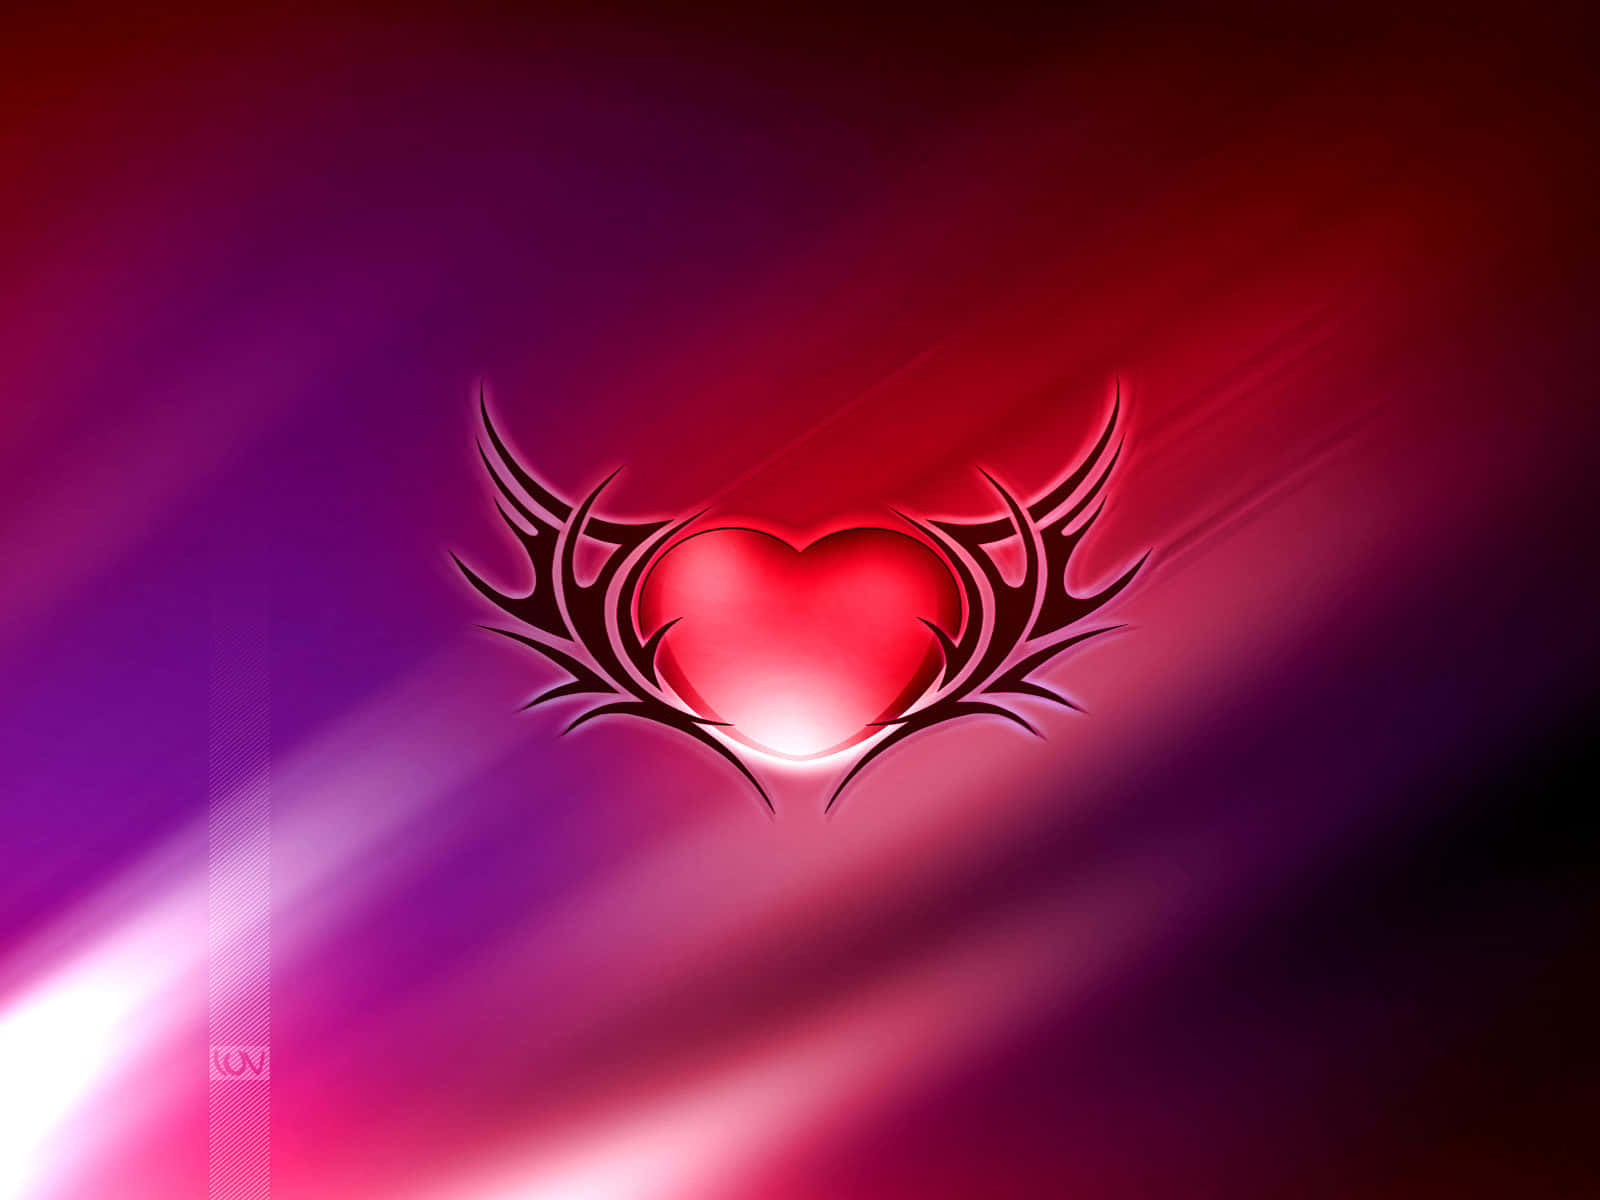 Passionate Heart With Wings Wallpaper